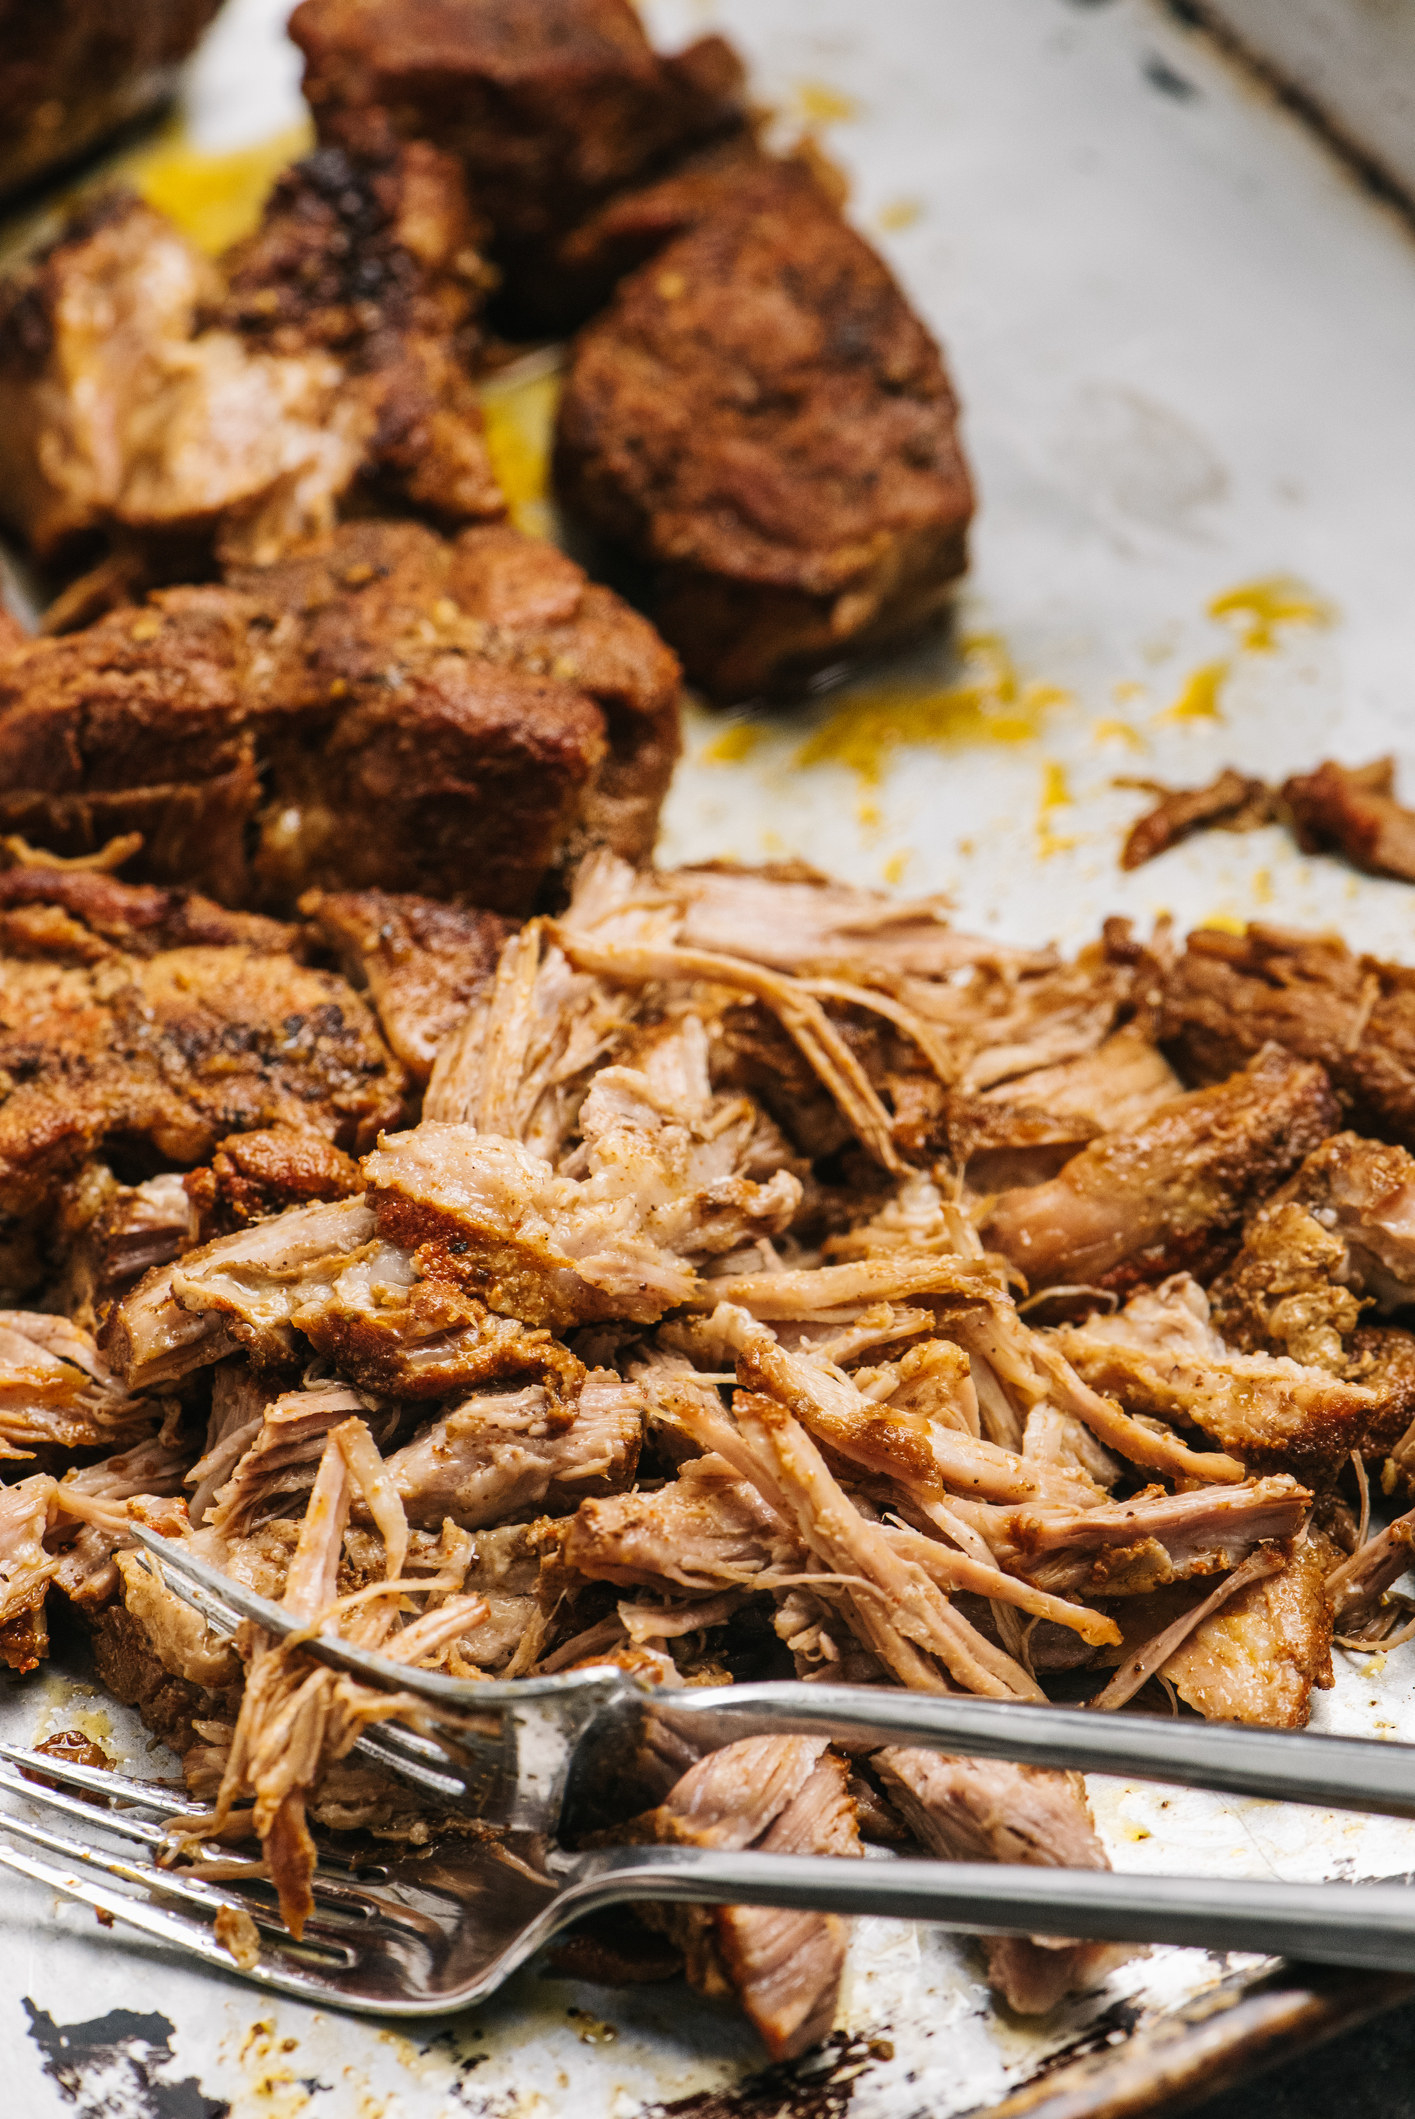 Slow cooked pulled pork.